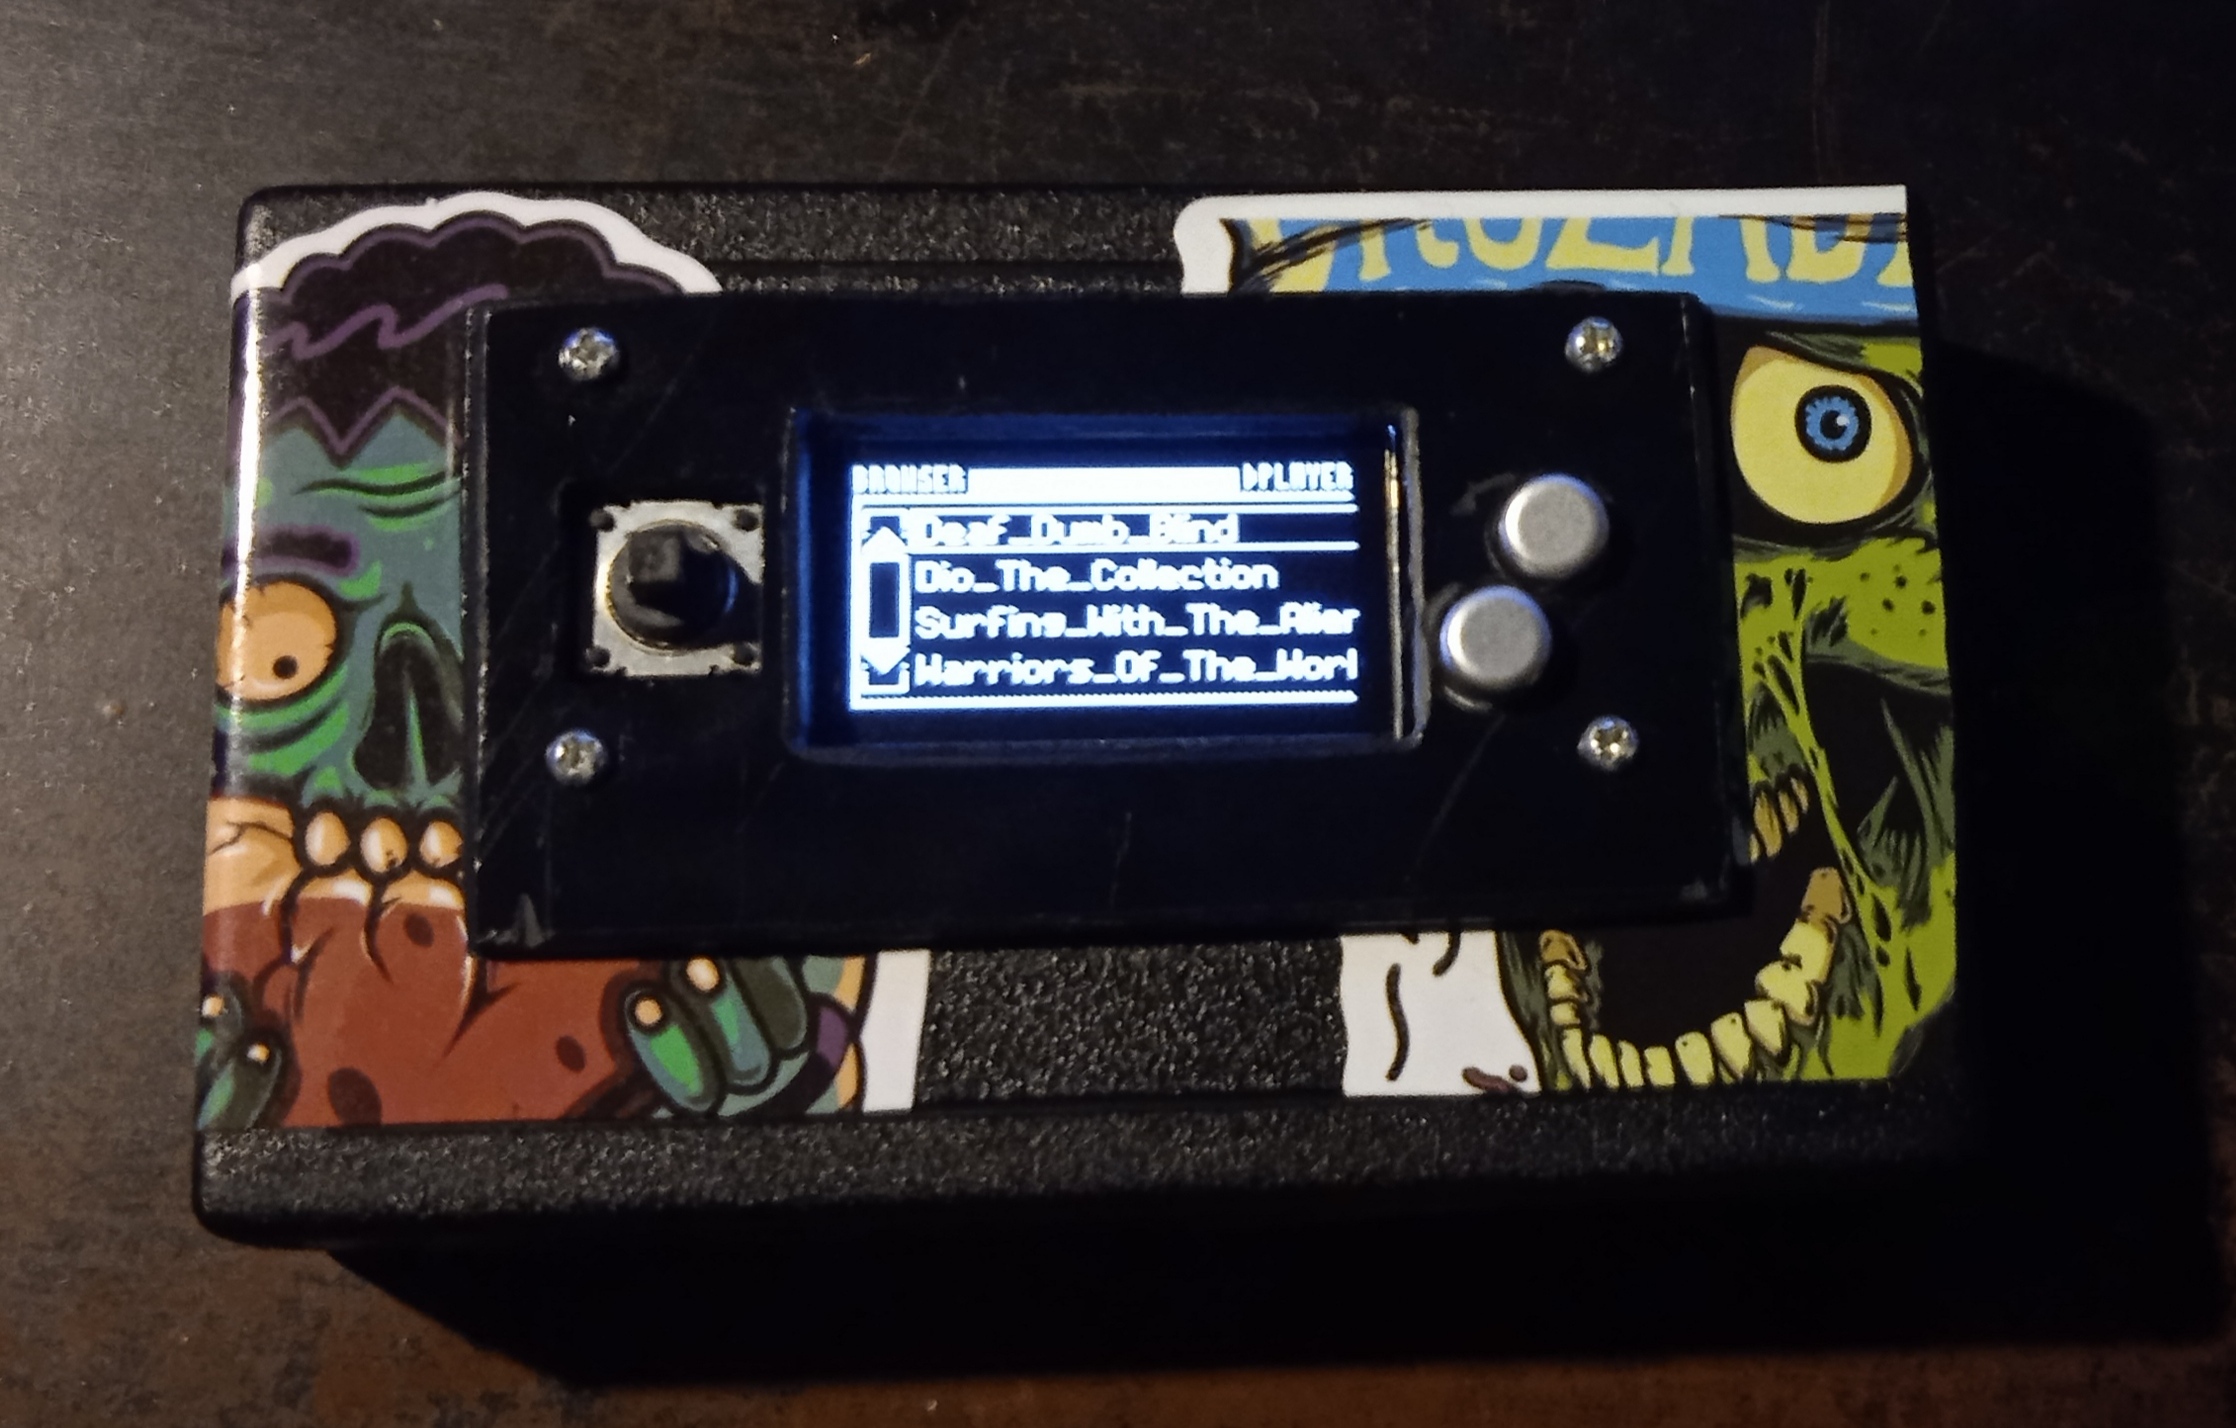 Caius meesteres bijstand Portable PI Powered Music Player | Hackaday